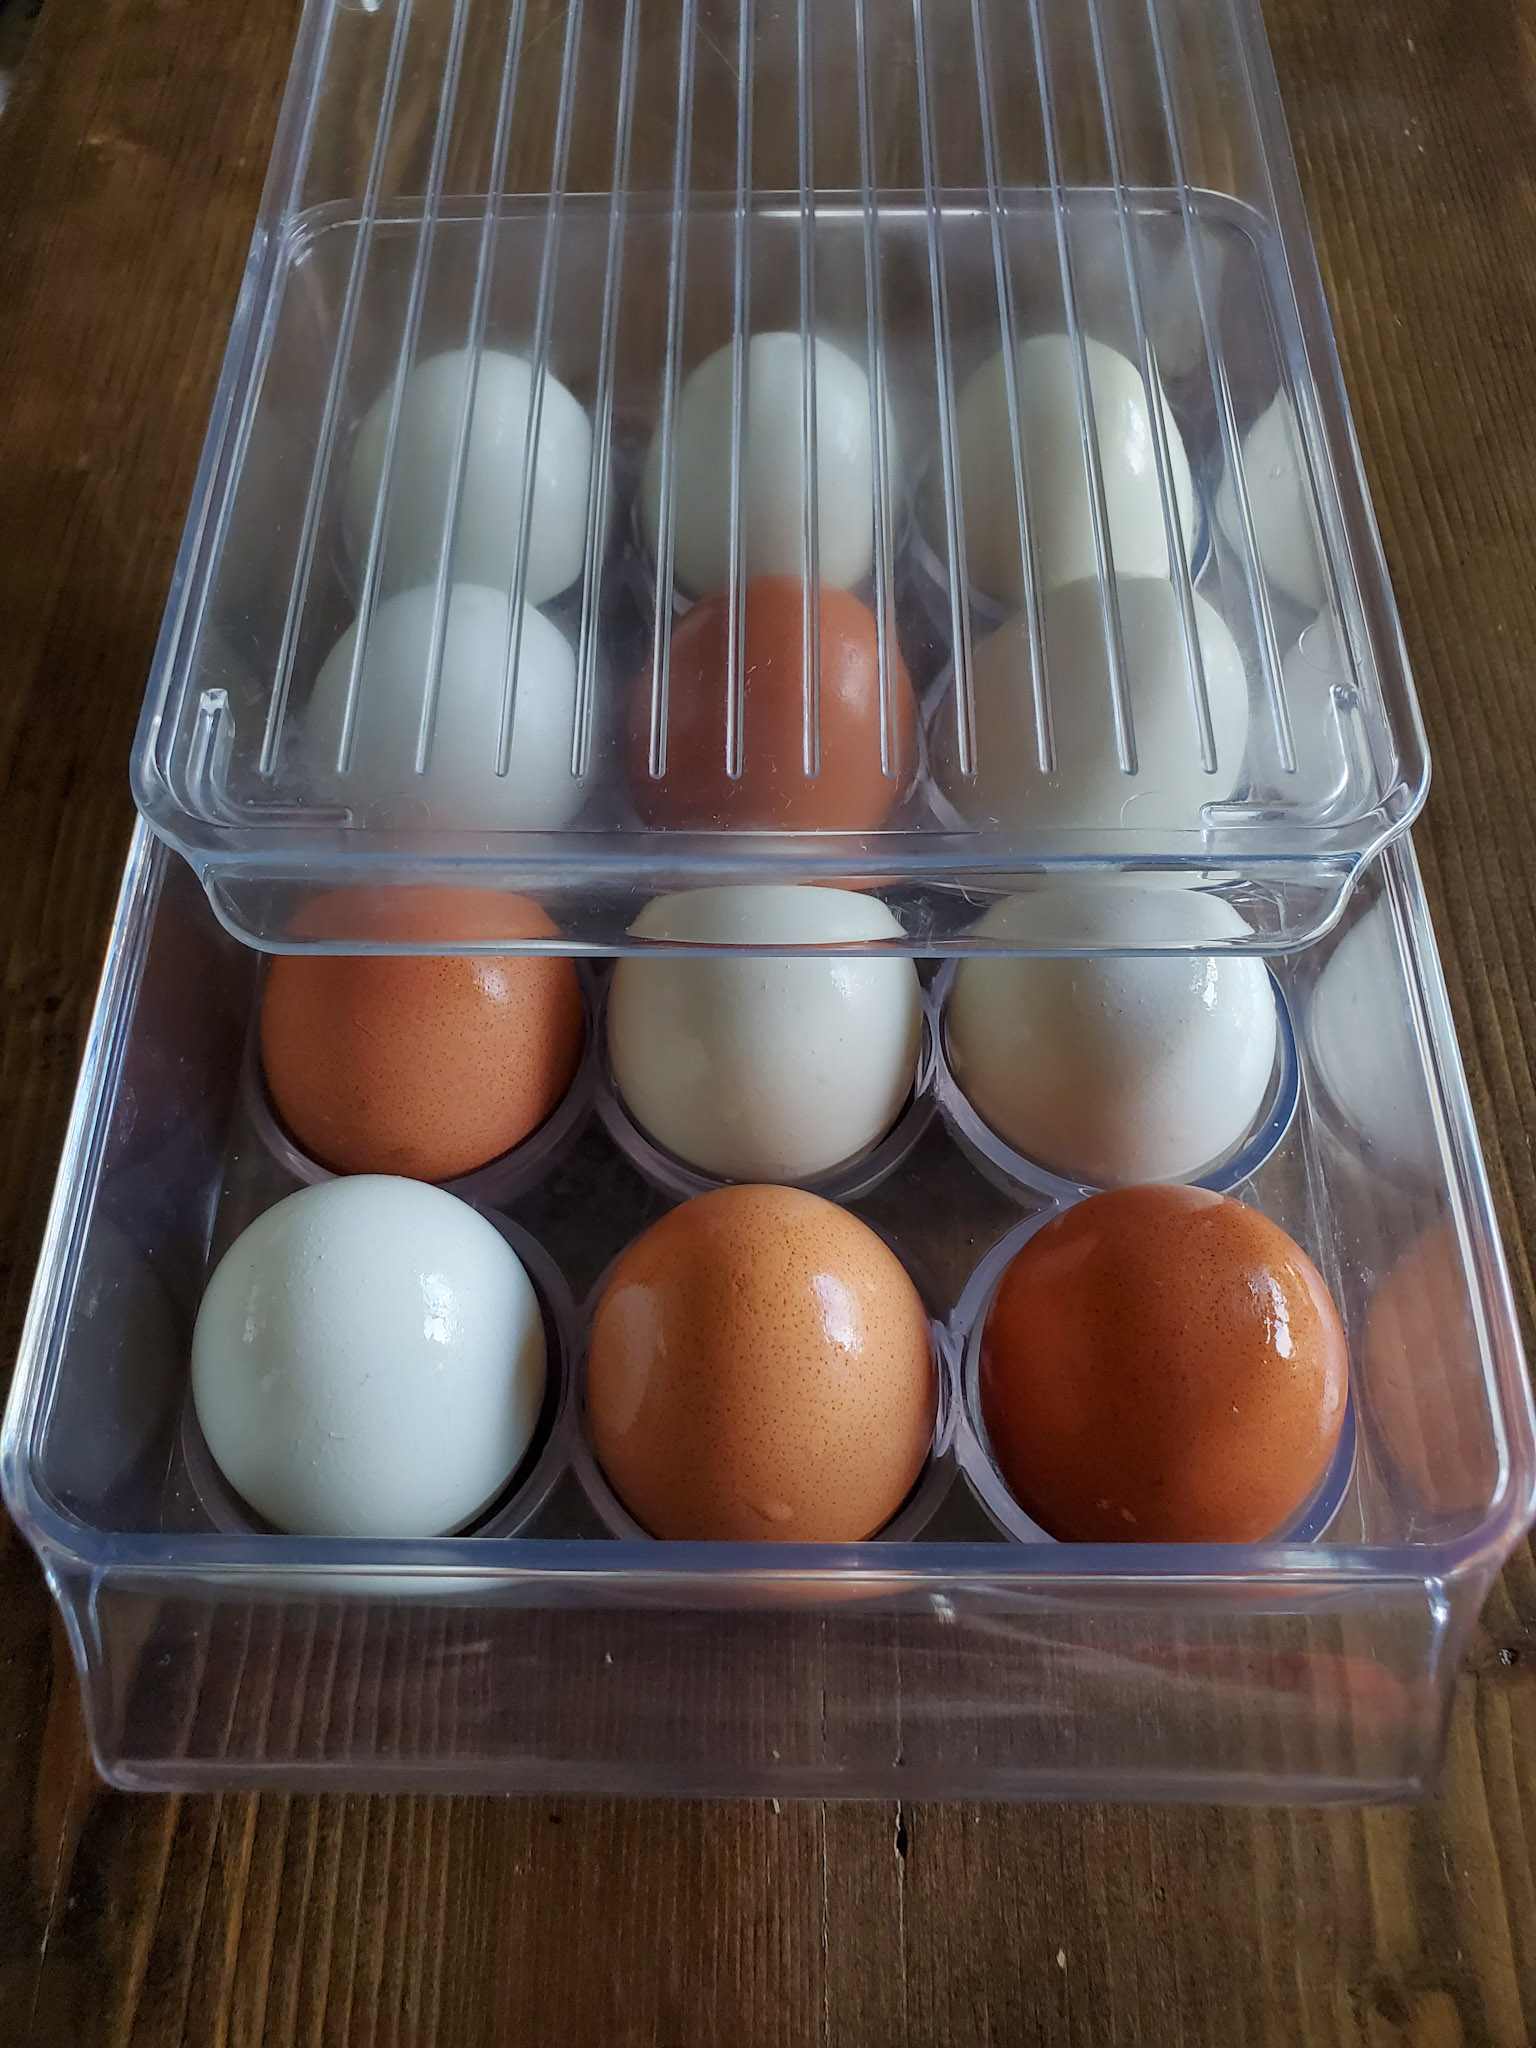 A dozen eggs are in a plastic egg storage container. The eggs range in color from light blue, to light green, and dark brown. The eggs have a sheen on their shell from being used in a float test. The container is partially covered with a clear plastic lid that will be fully placed over the container during storage. 